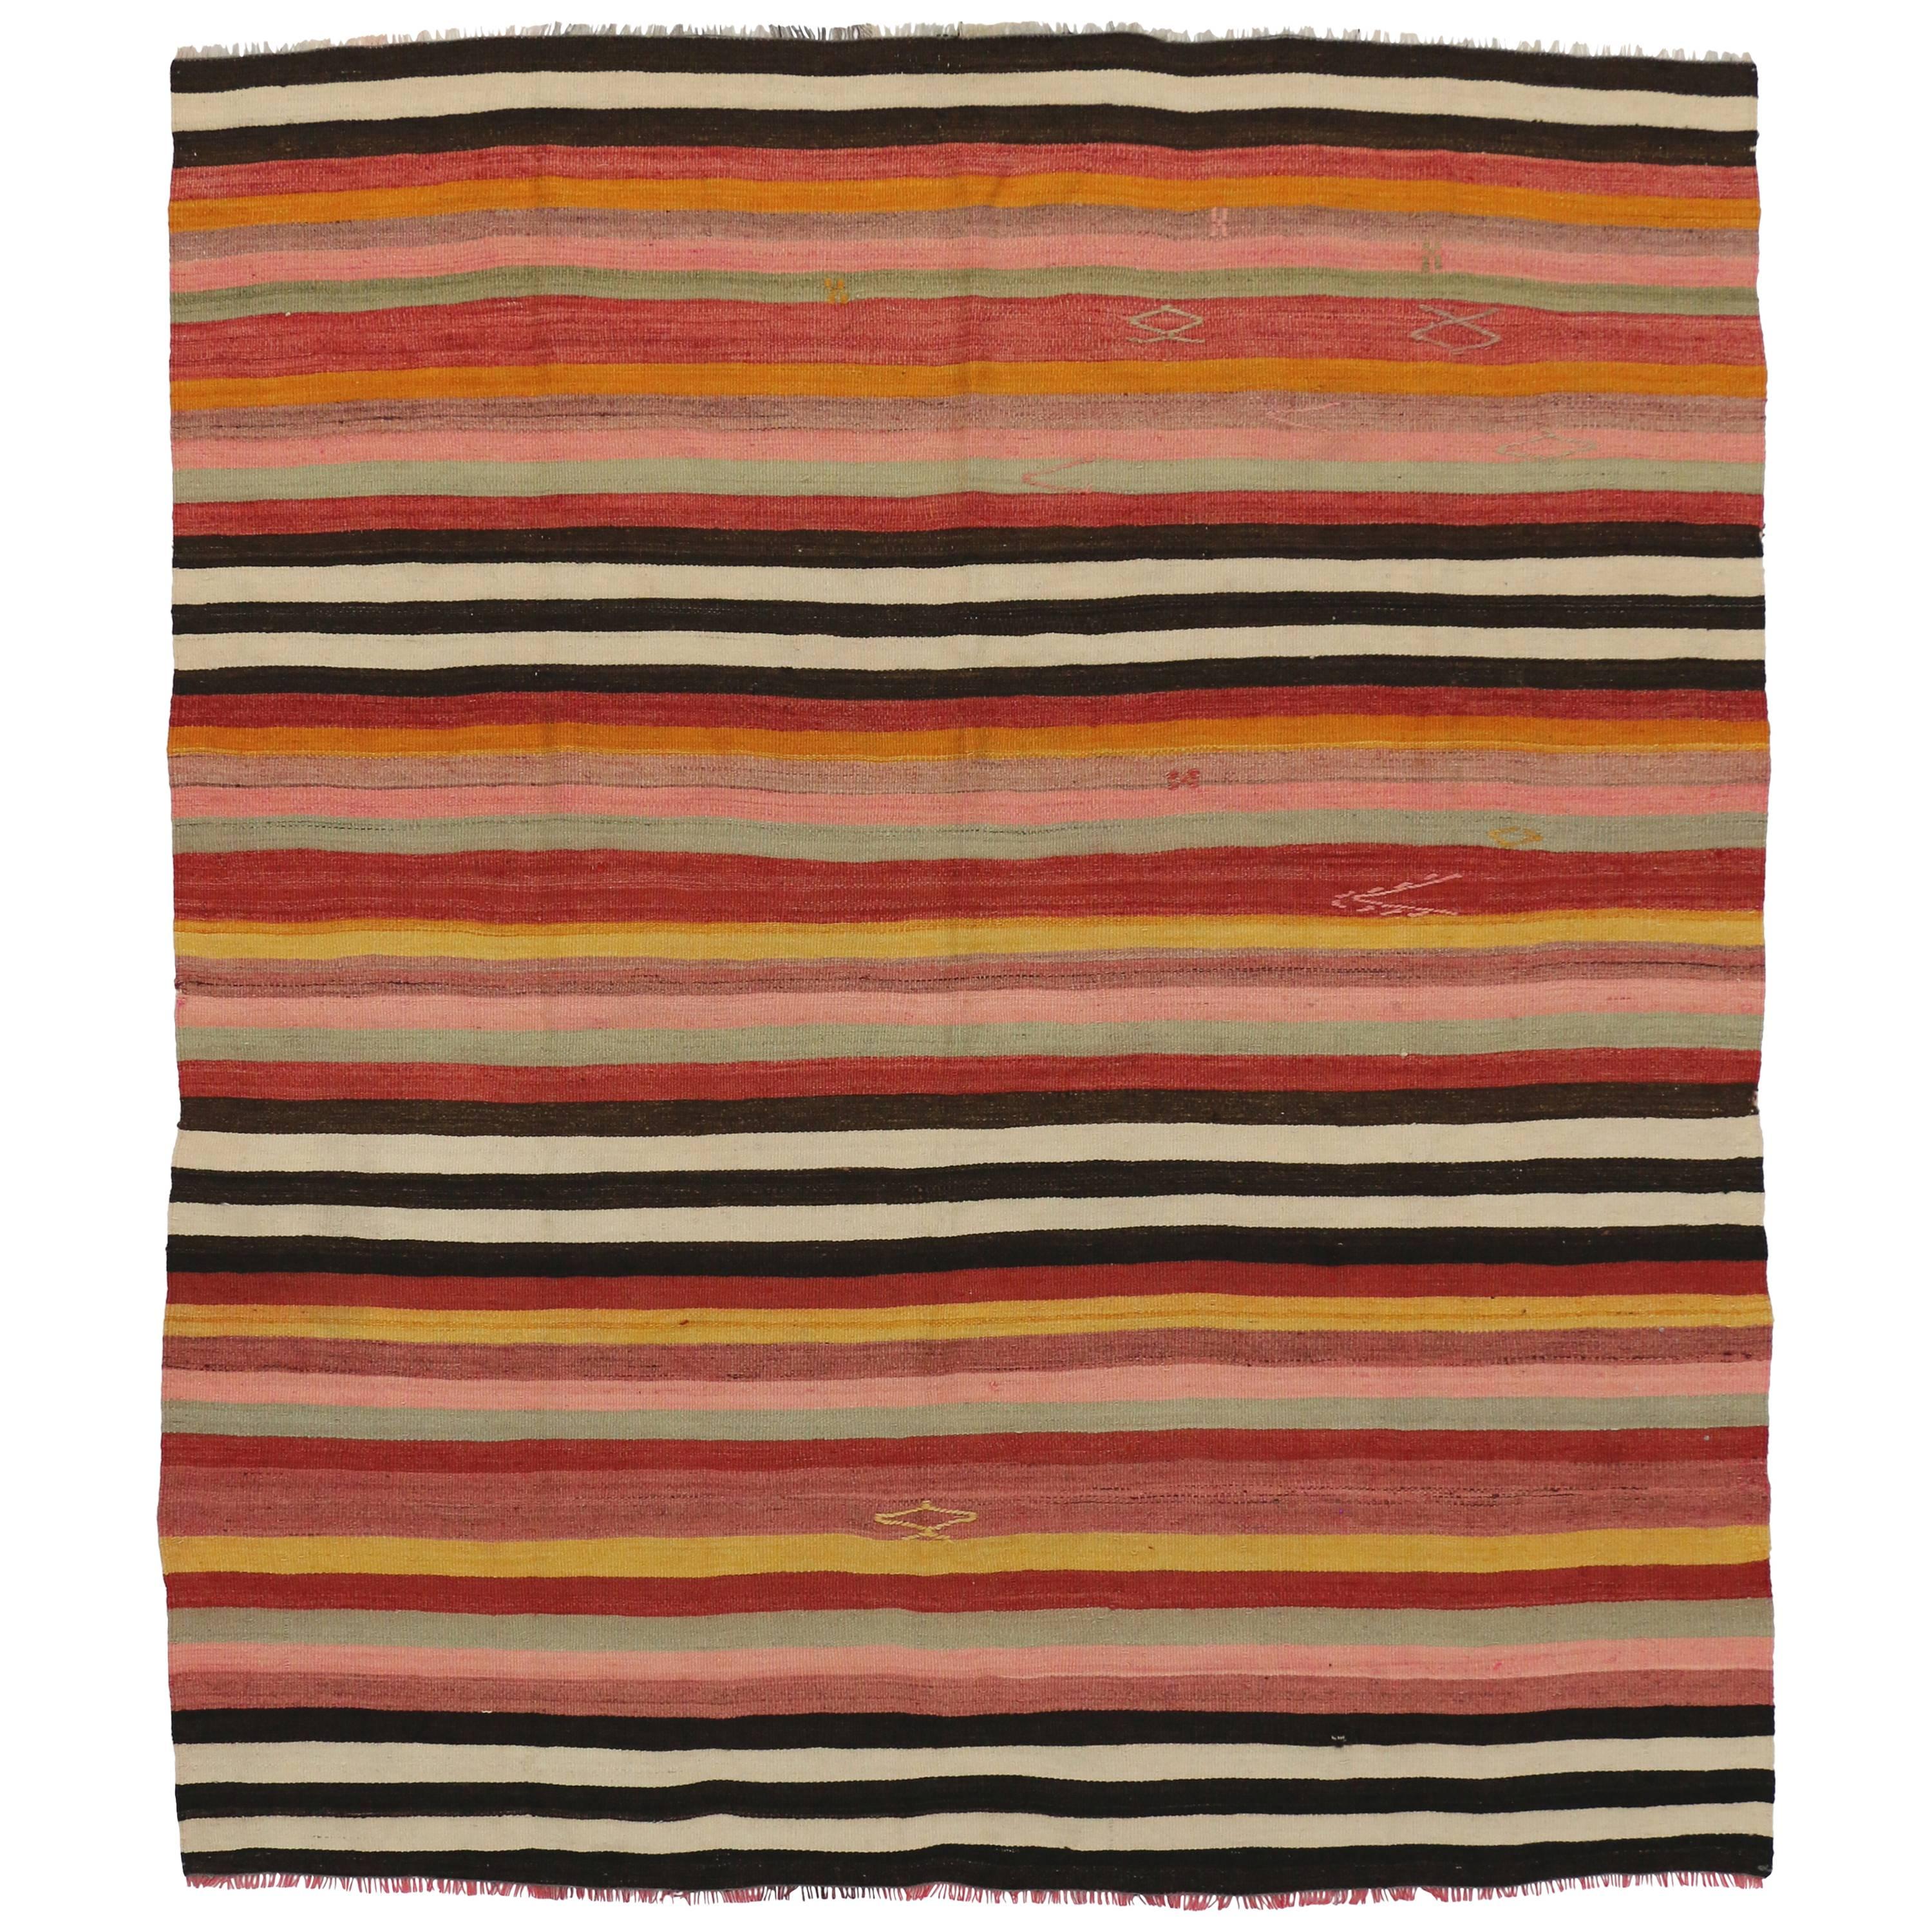 Vintage Turkish Kilim Rug with Stripes and Boho Chic Style, Striped Flat-Weave